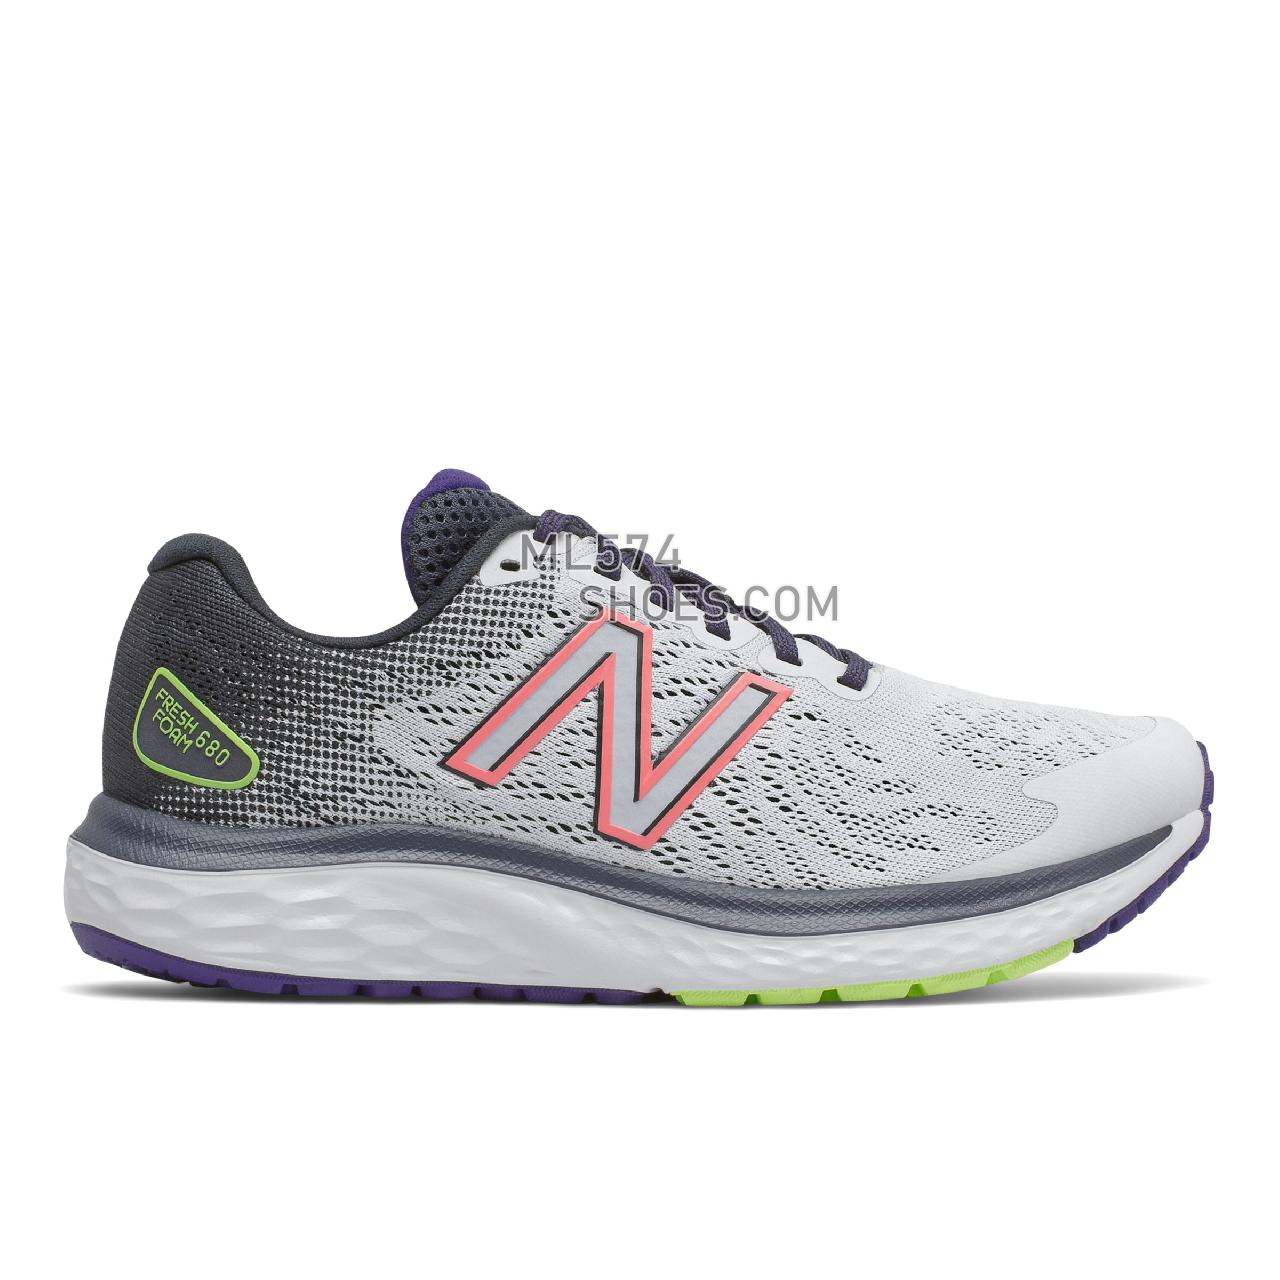 New Balance Fresh Foam 680v7 - Women's Neutral Running - Arctic fox with outer space and paradise pink - W680LW7